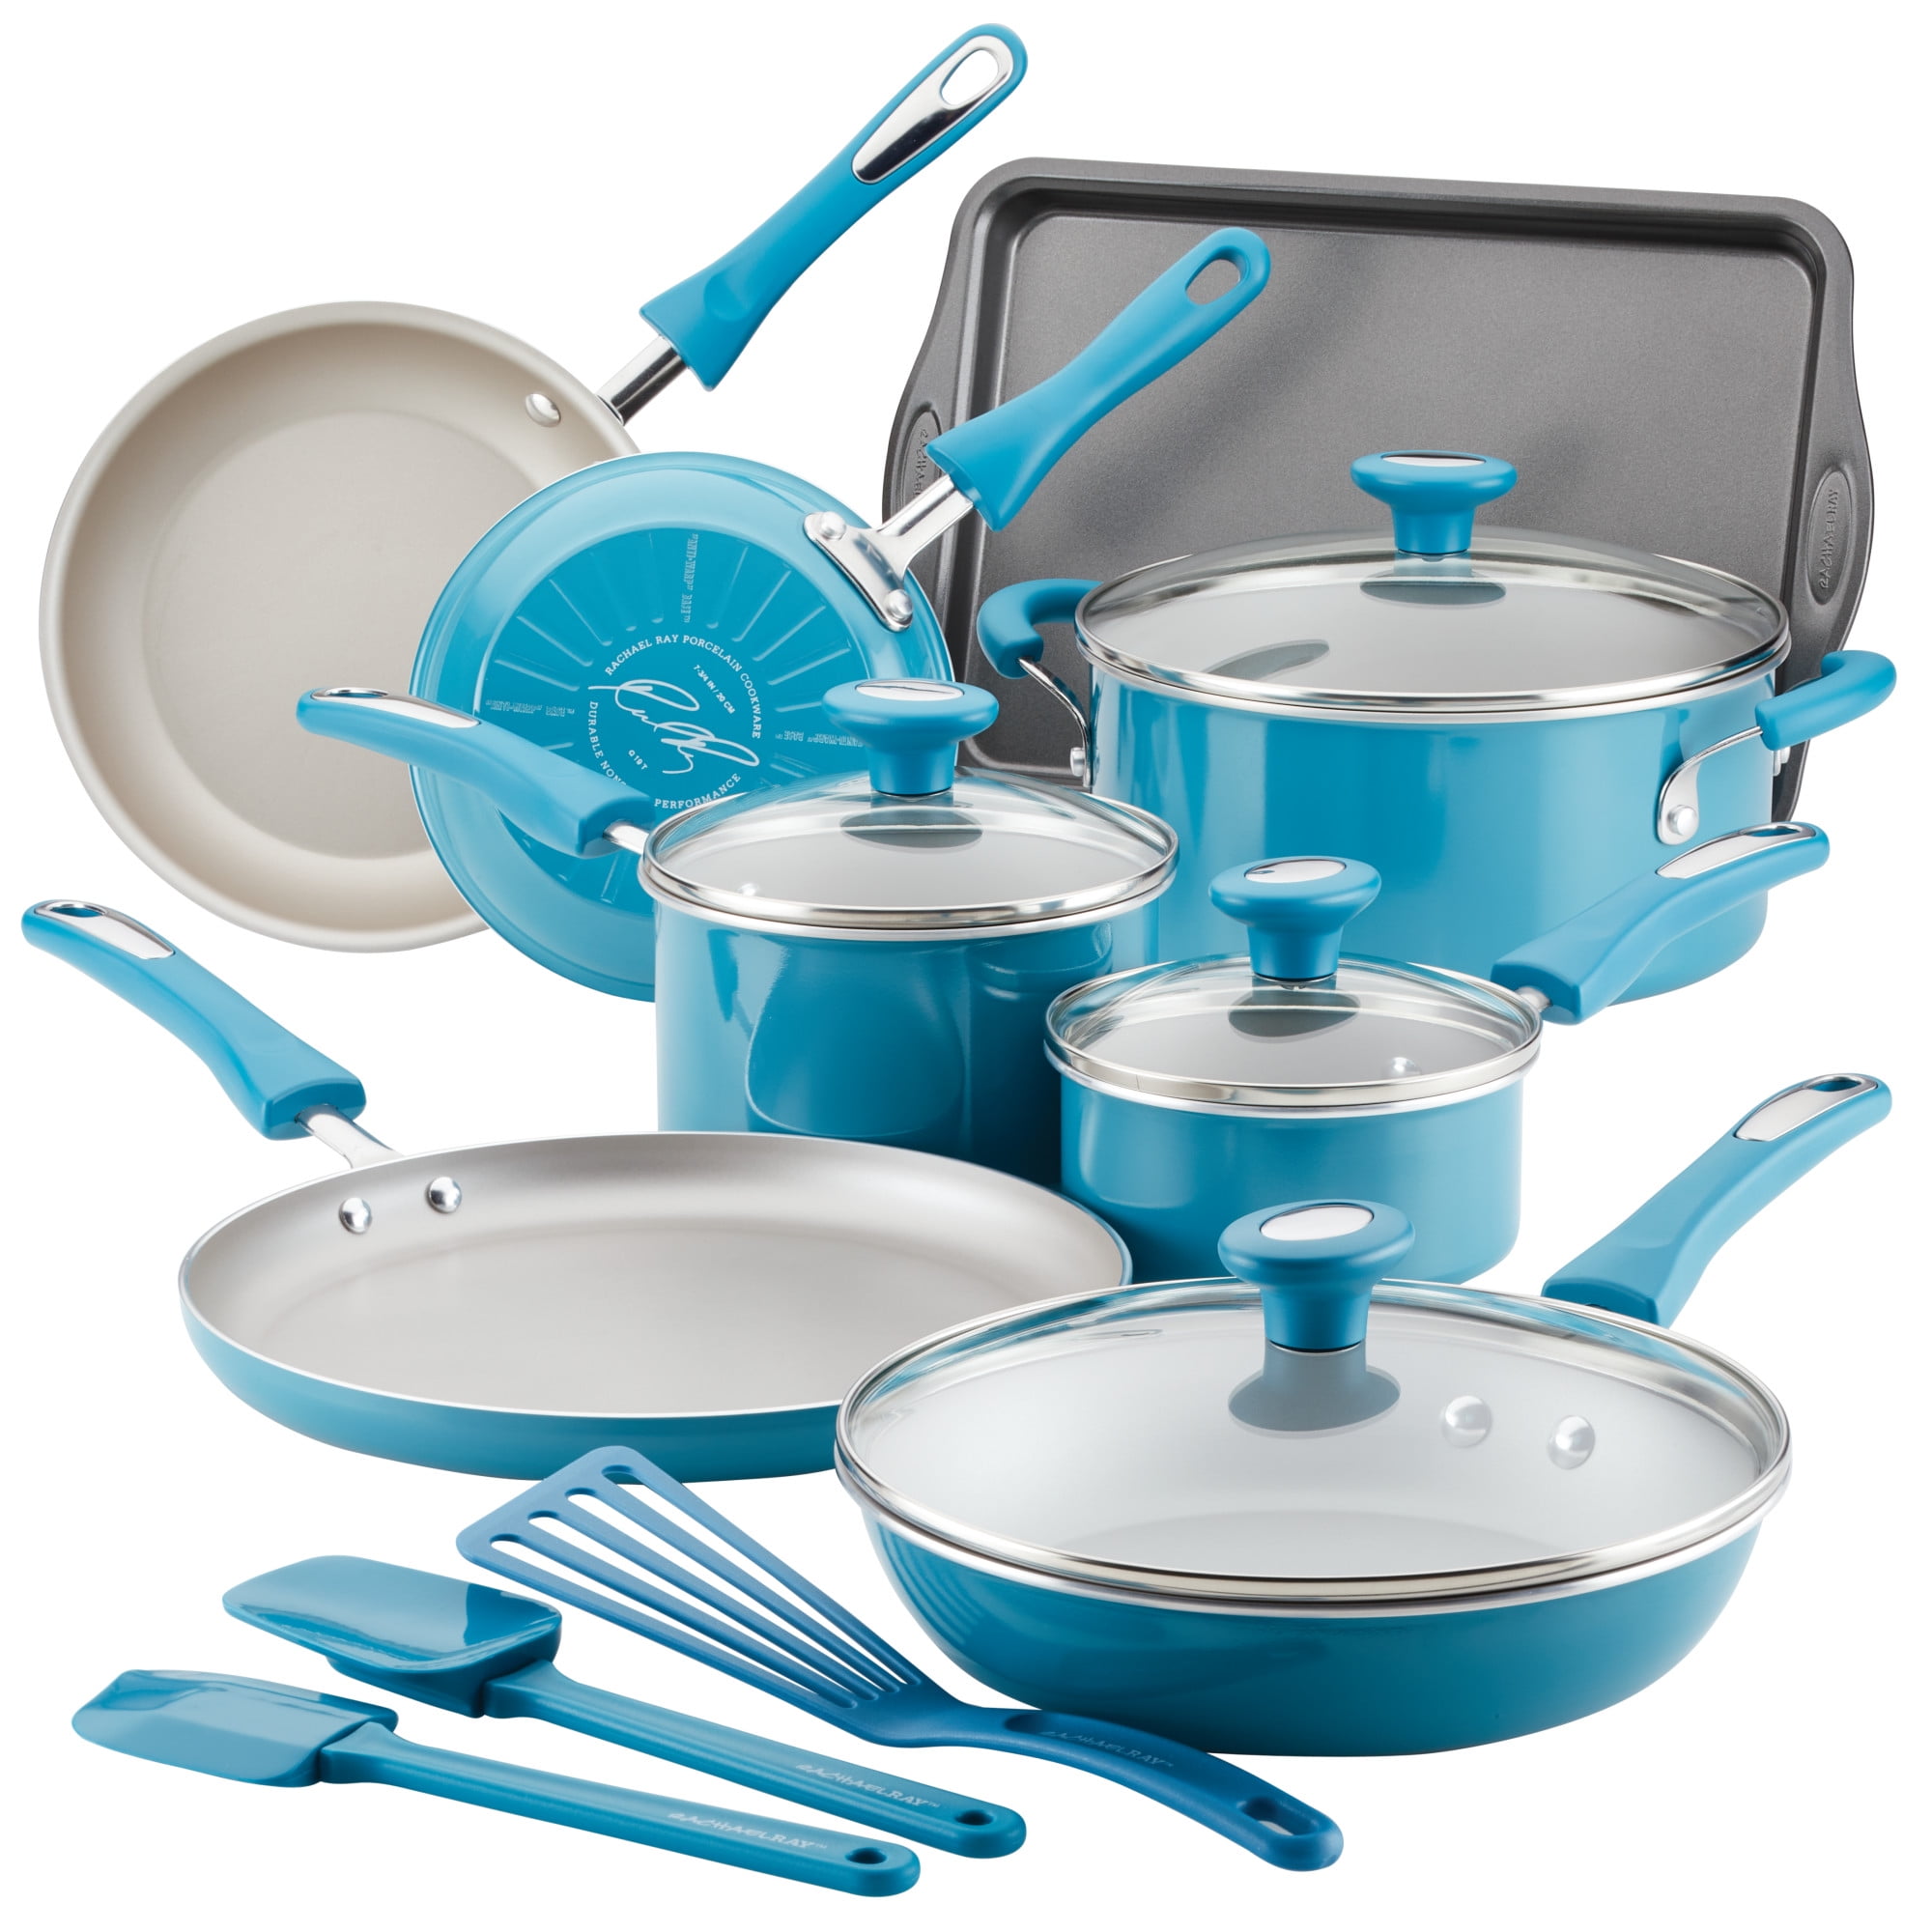 Rachael Ray 12-Piece Get Cooking Nonstick Pots and Pans Set 